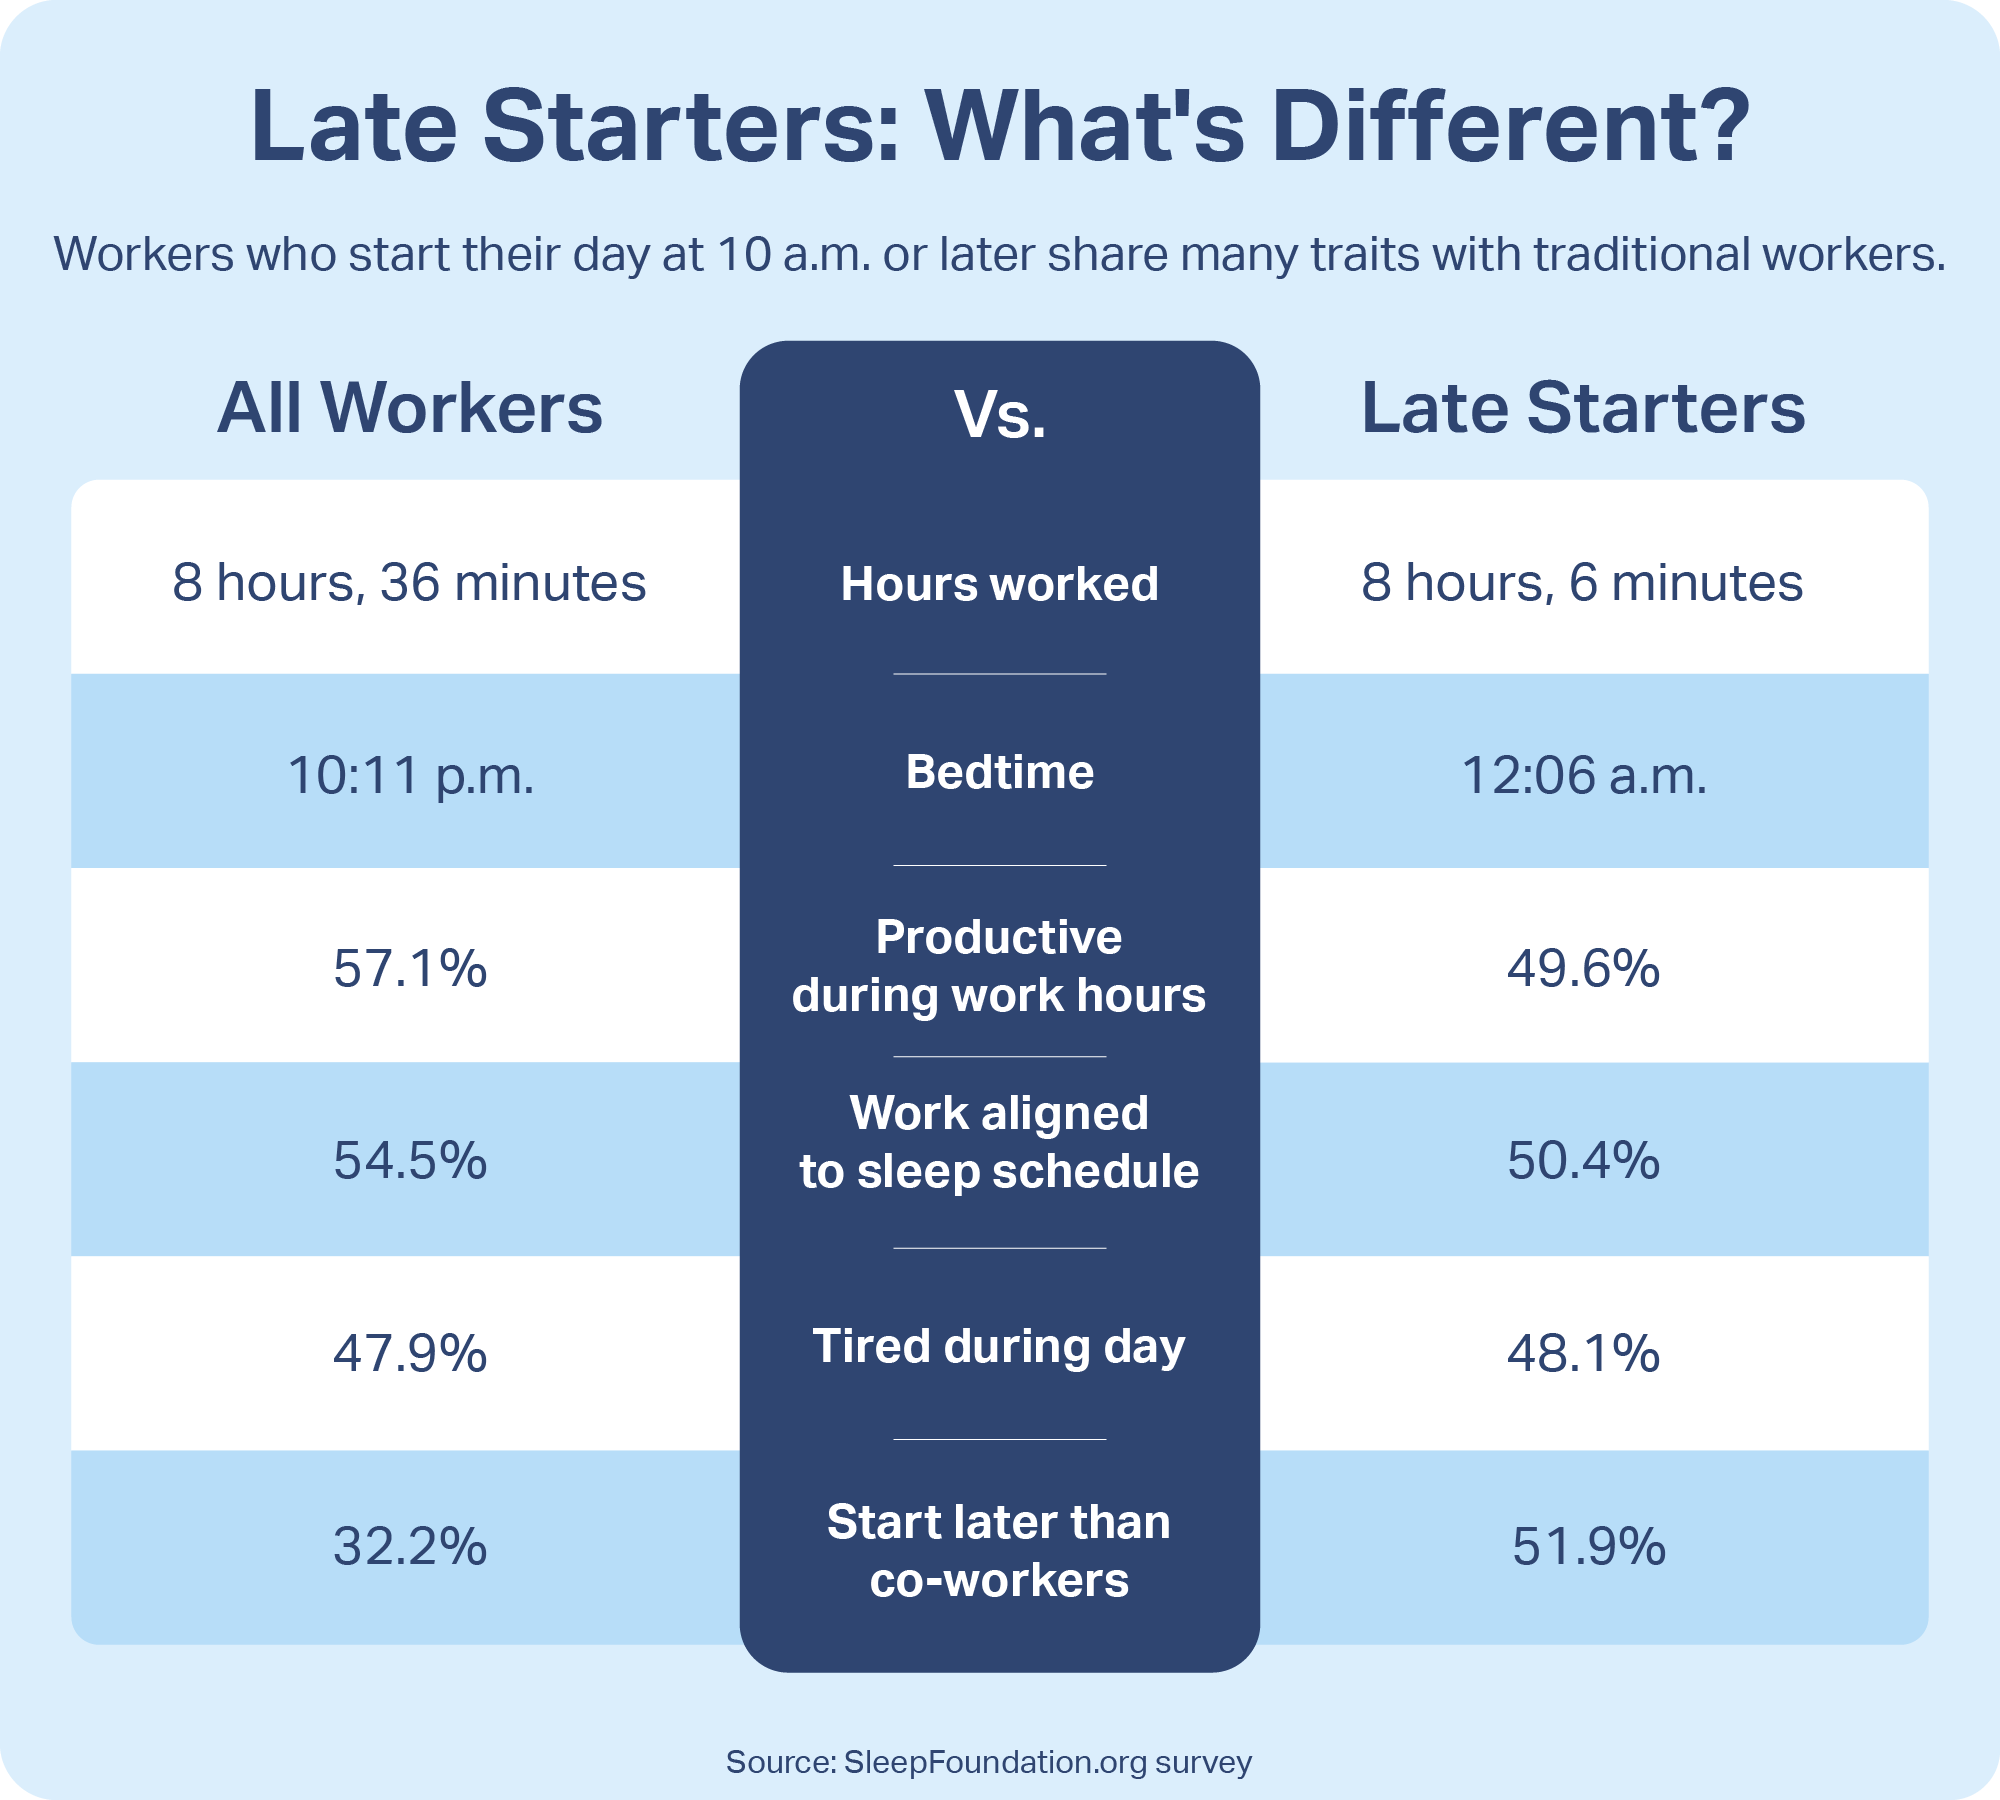 Late Starters: What's Different?